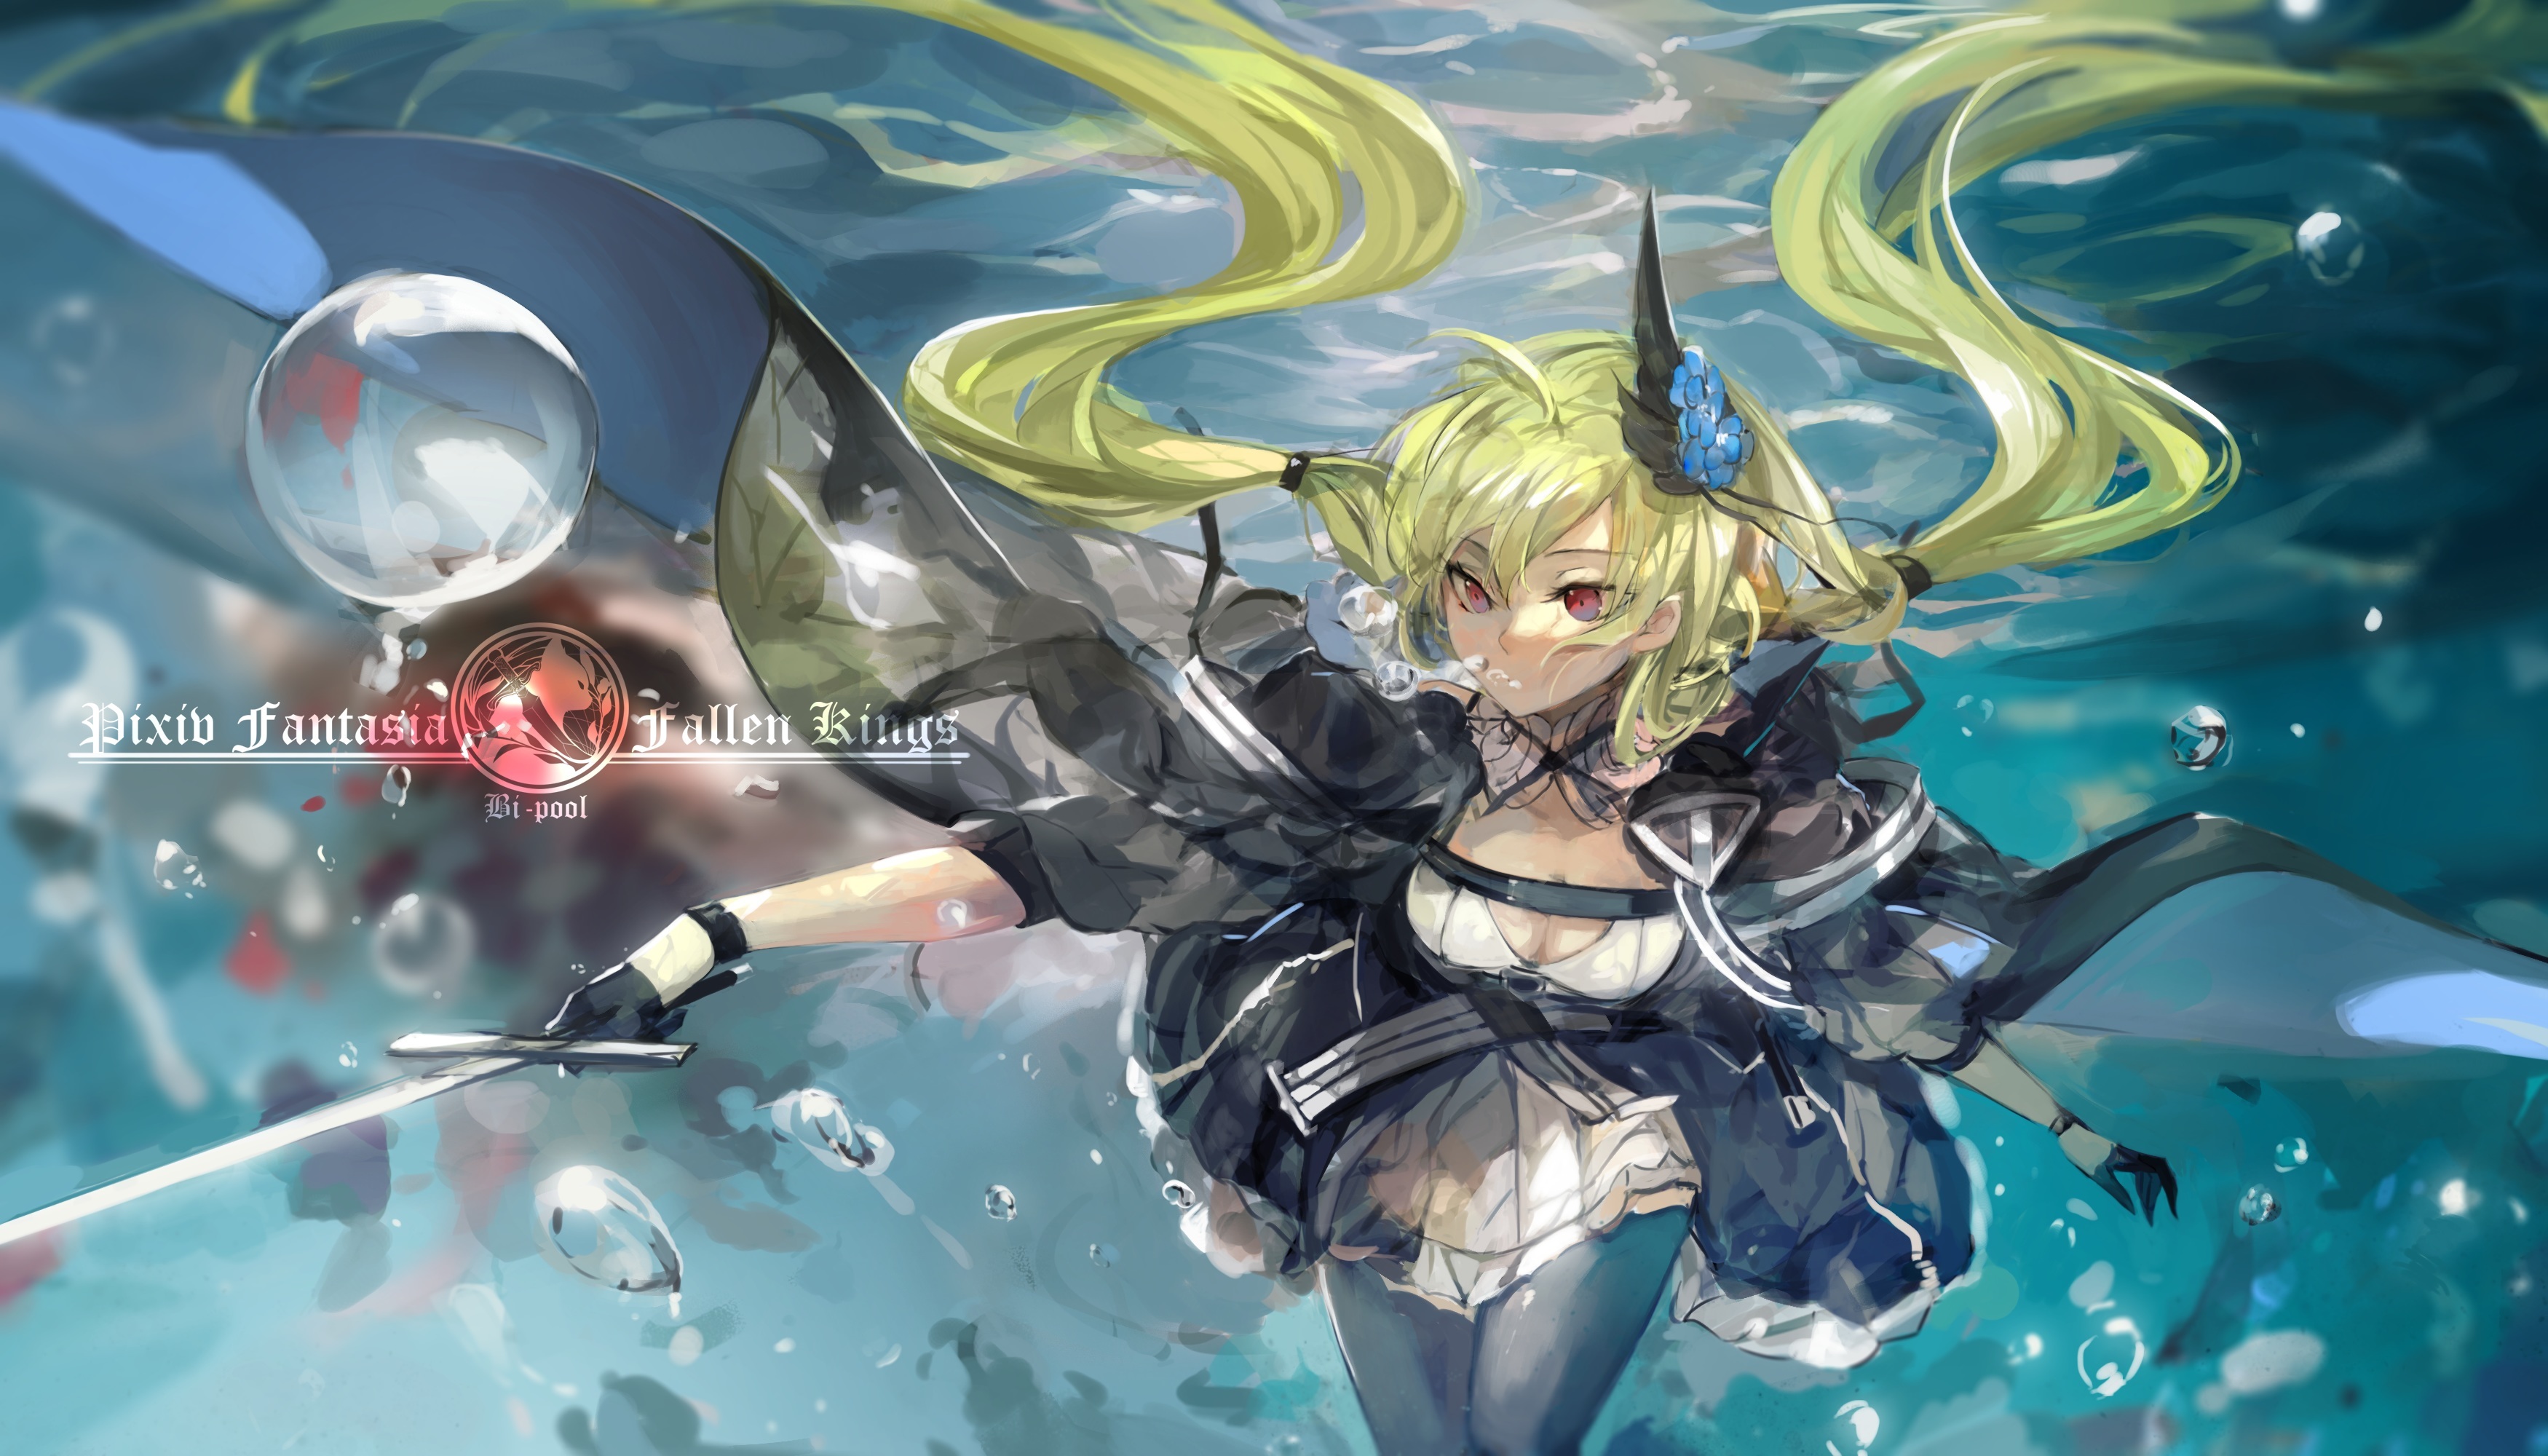 Pixiv Fantasia Fallen Kings Wallpapers, Pictures, Images